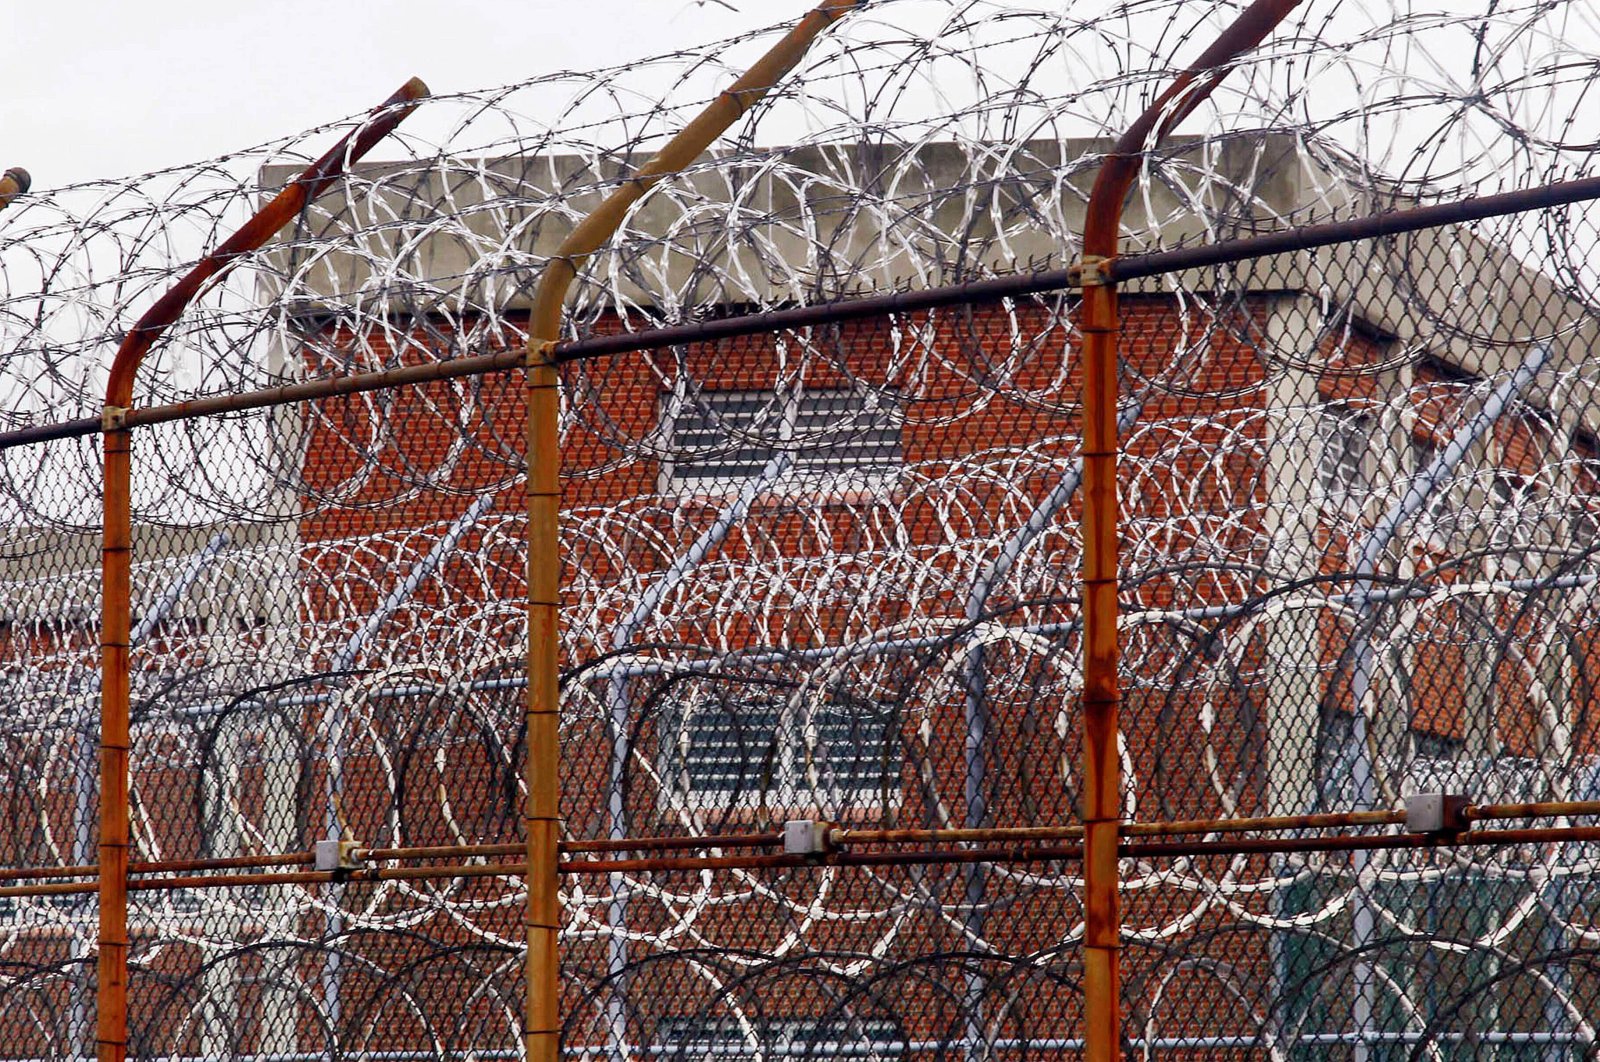 In this March 16, 2011, file photo, a security fence surrounds inmate housing at the Rikers Island correctional facility in New York. As of May 6, 2020, more than 20,000 inmates have been infected by the coronavirus and 295 have died nationwide, according to an unofficial tally kept by UCLA Law's COVID-19 Behind Bars Data Project. (AP File Photo)